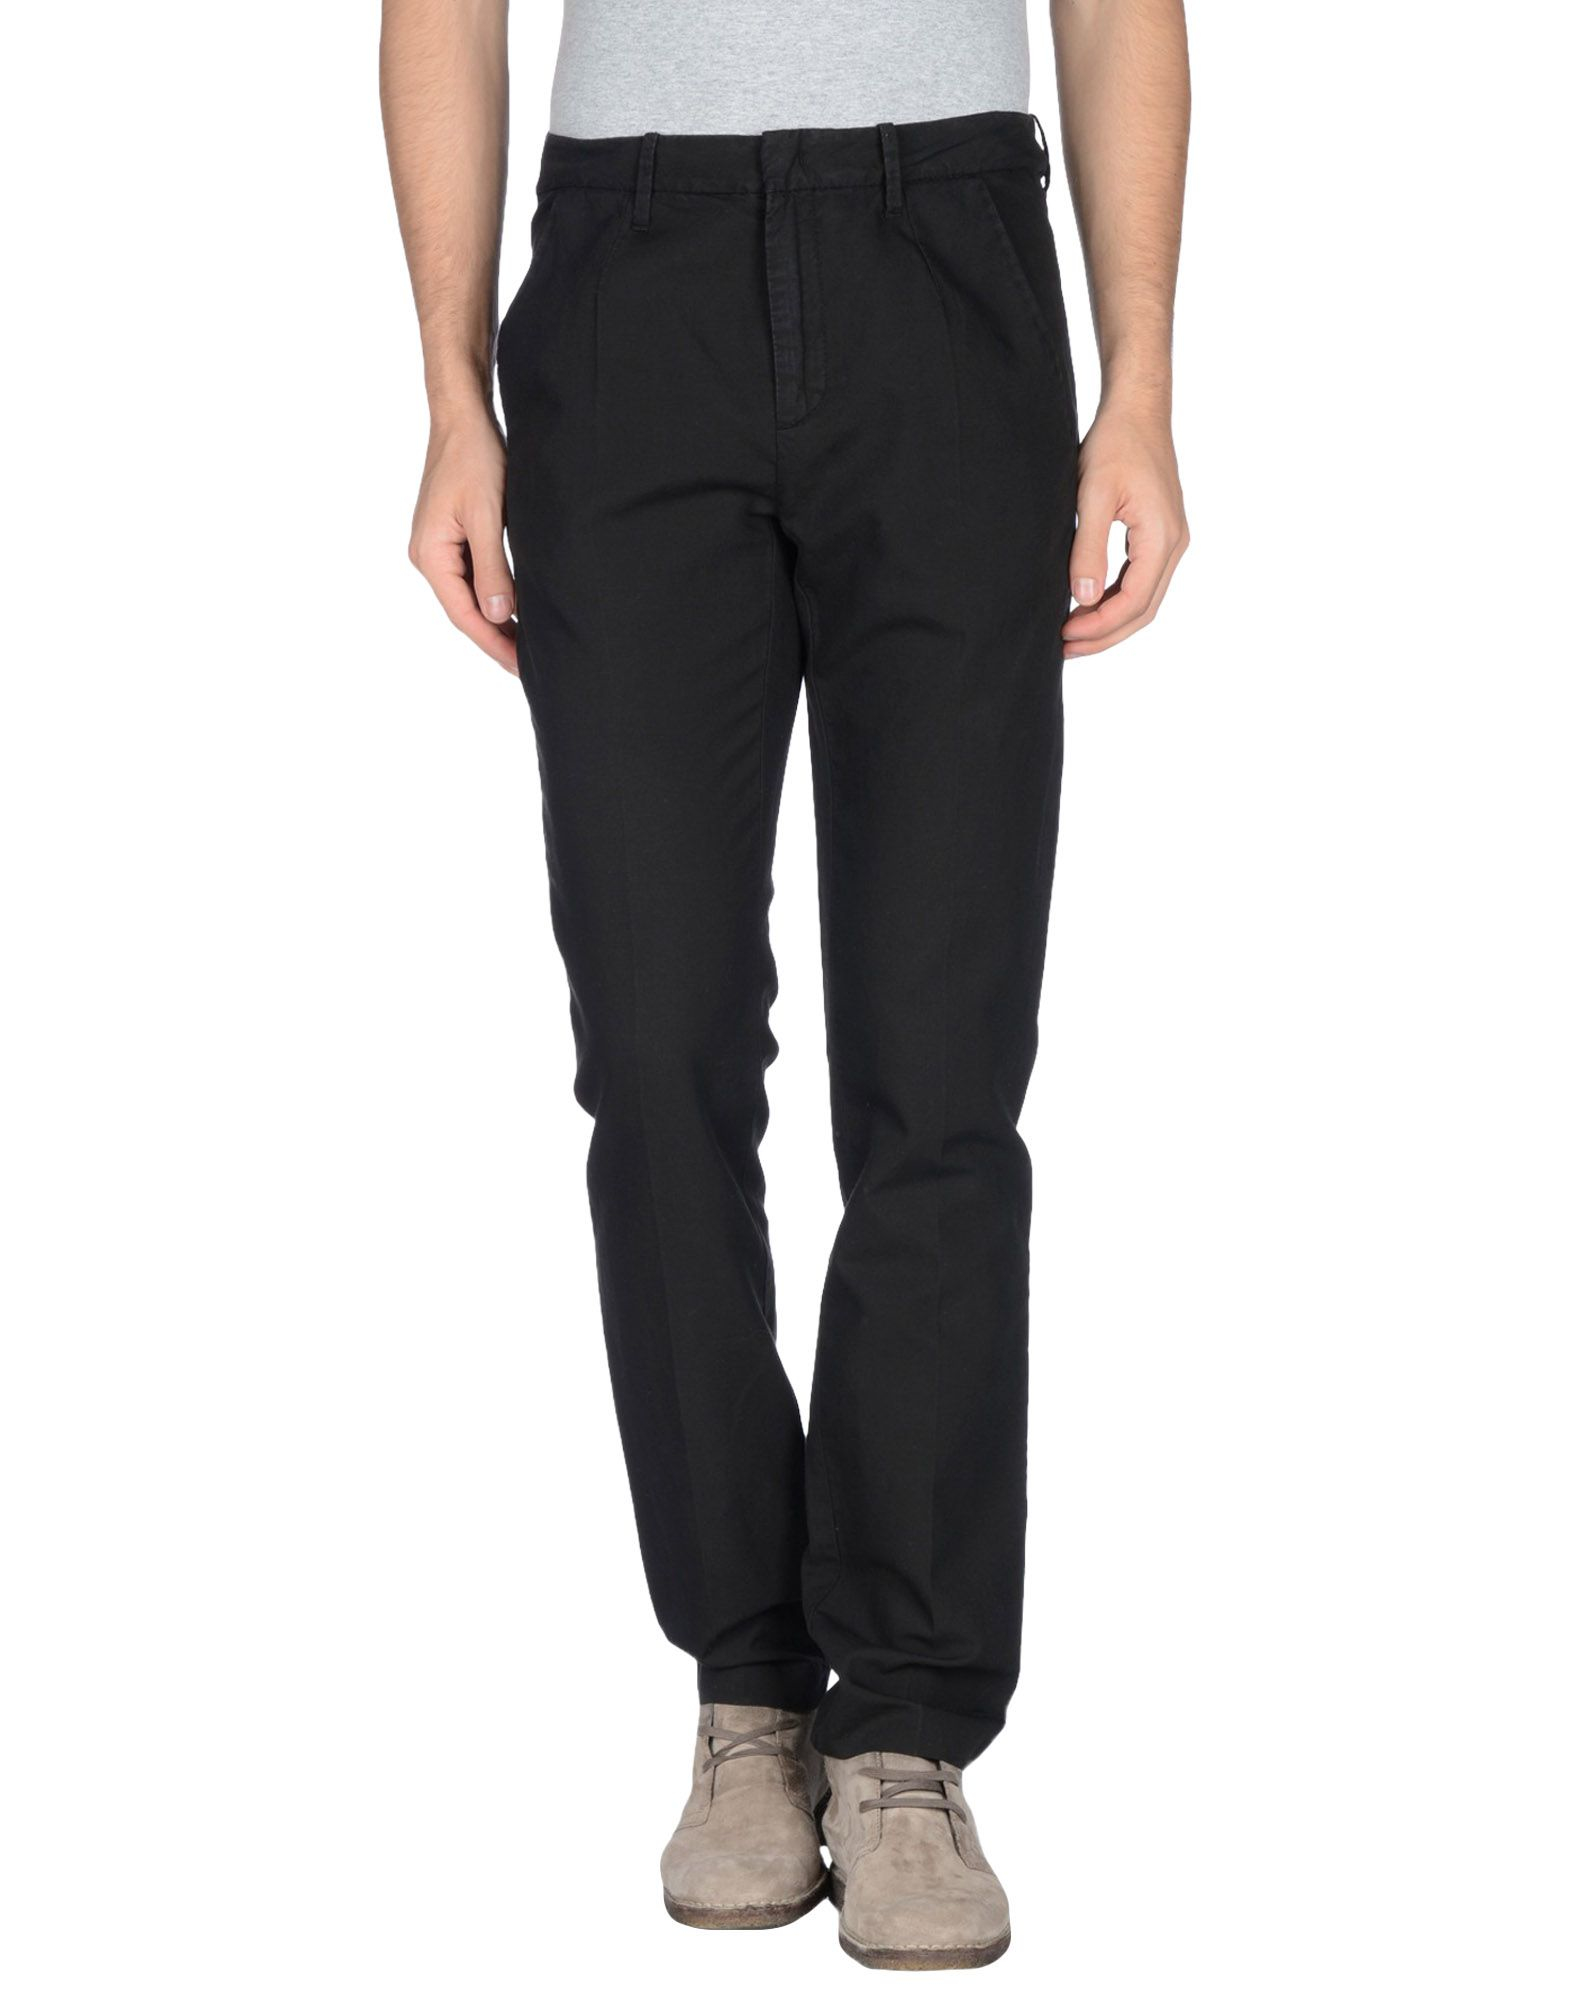 Lyst - Moschino Jeans Casual Trouser in Black for Men